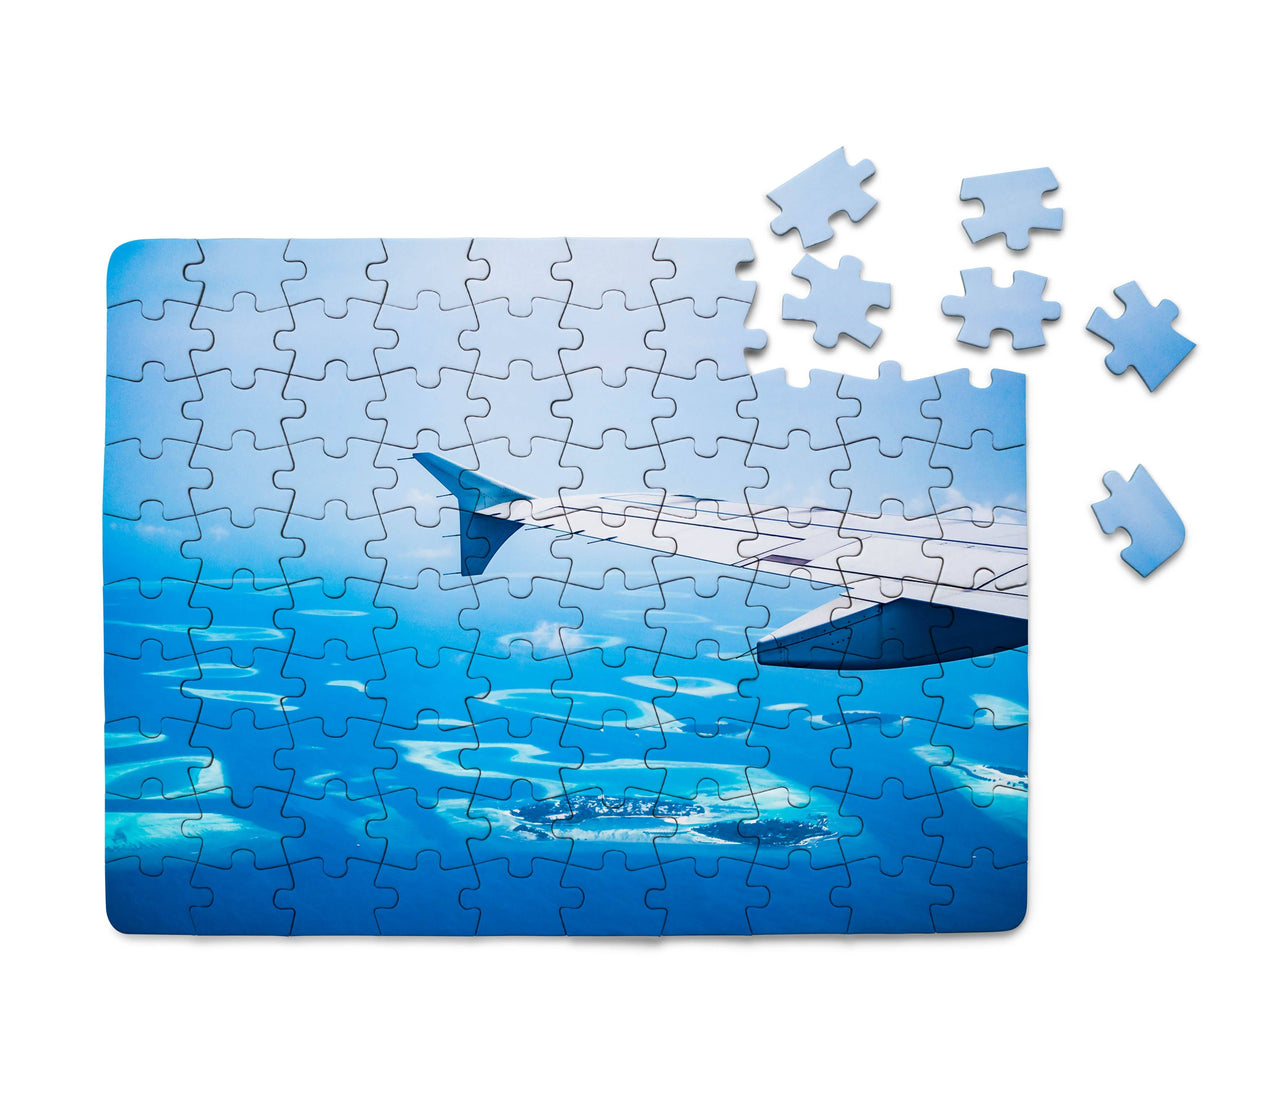 Outstanding View Through Airplane Wing Printed Puzzles Aviation Shop 